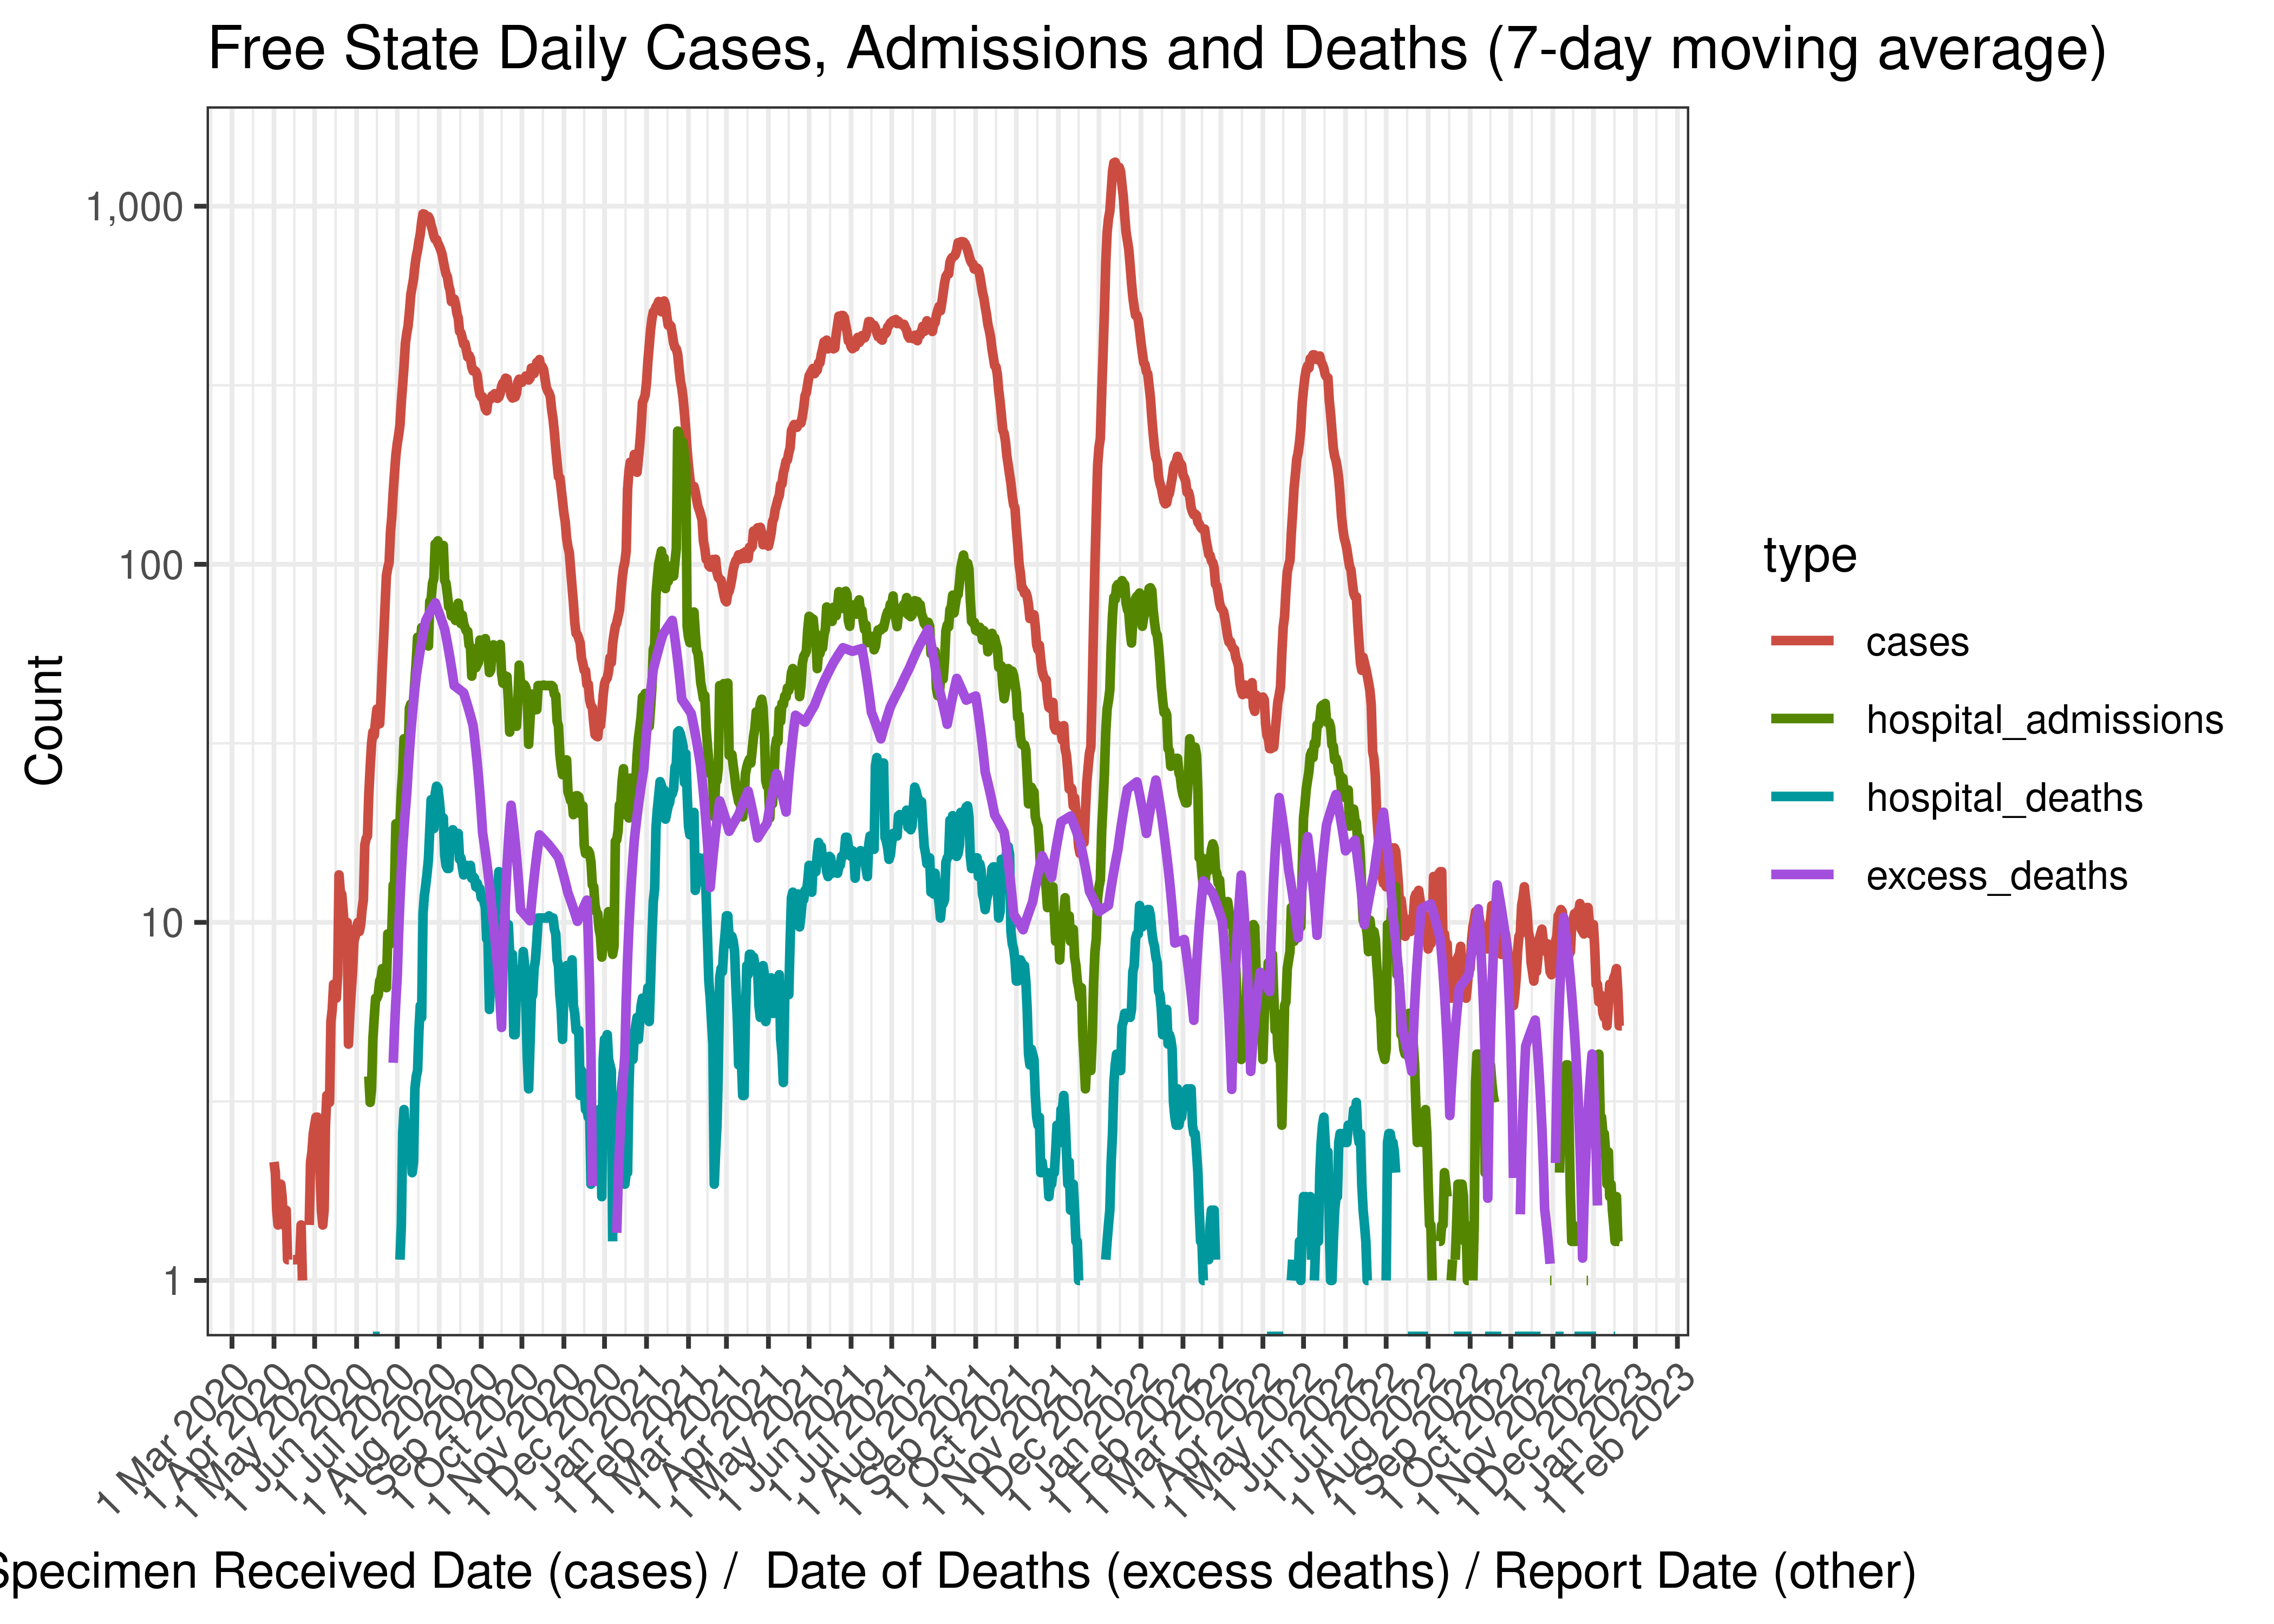 Free State Daily Cases, Admissions and Deaths (7-day moving average)